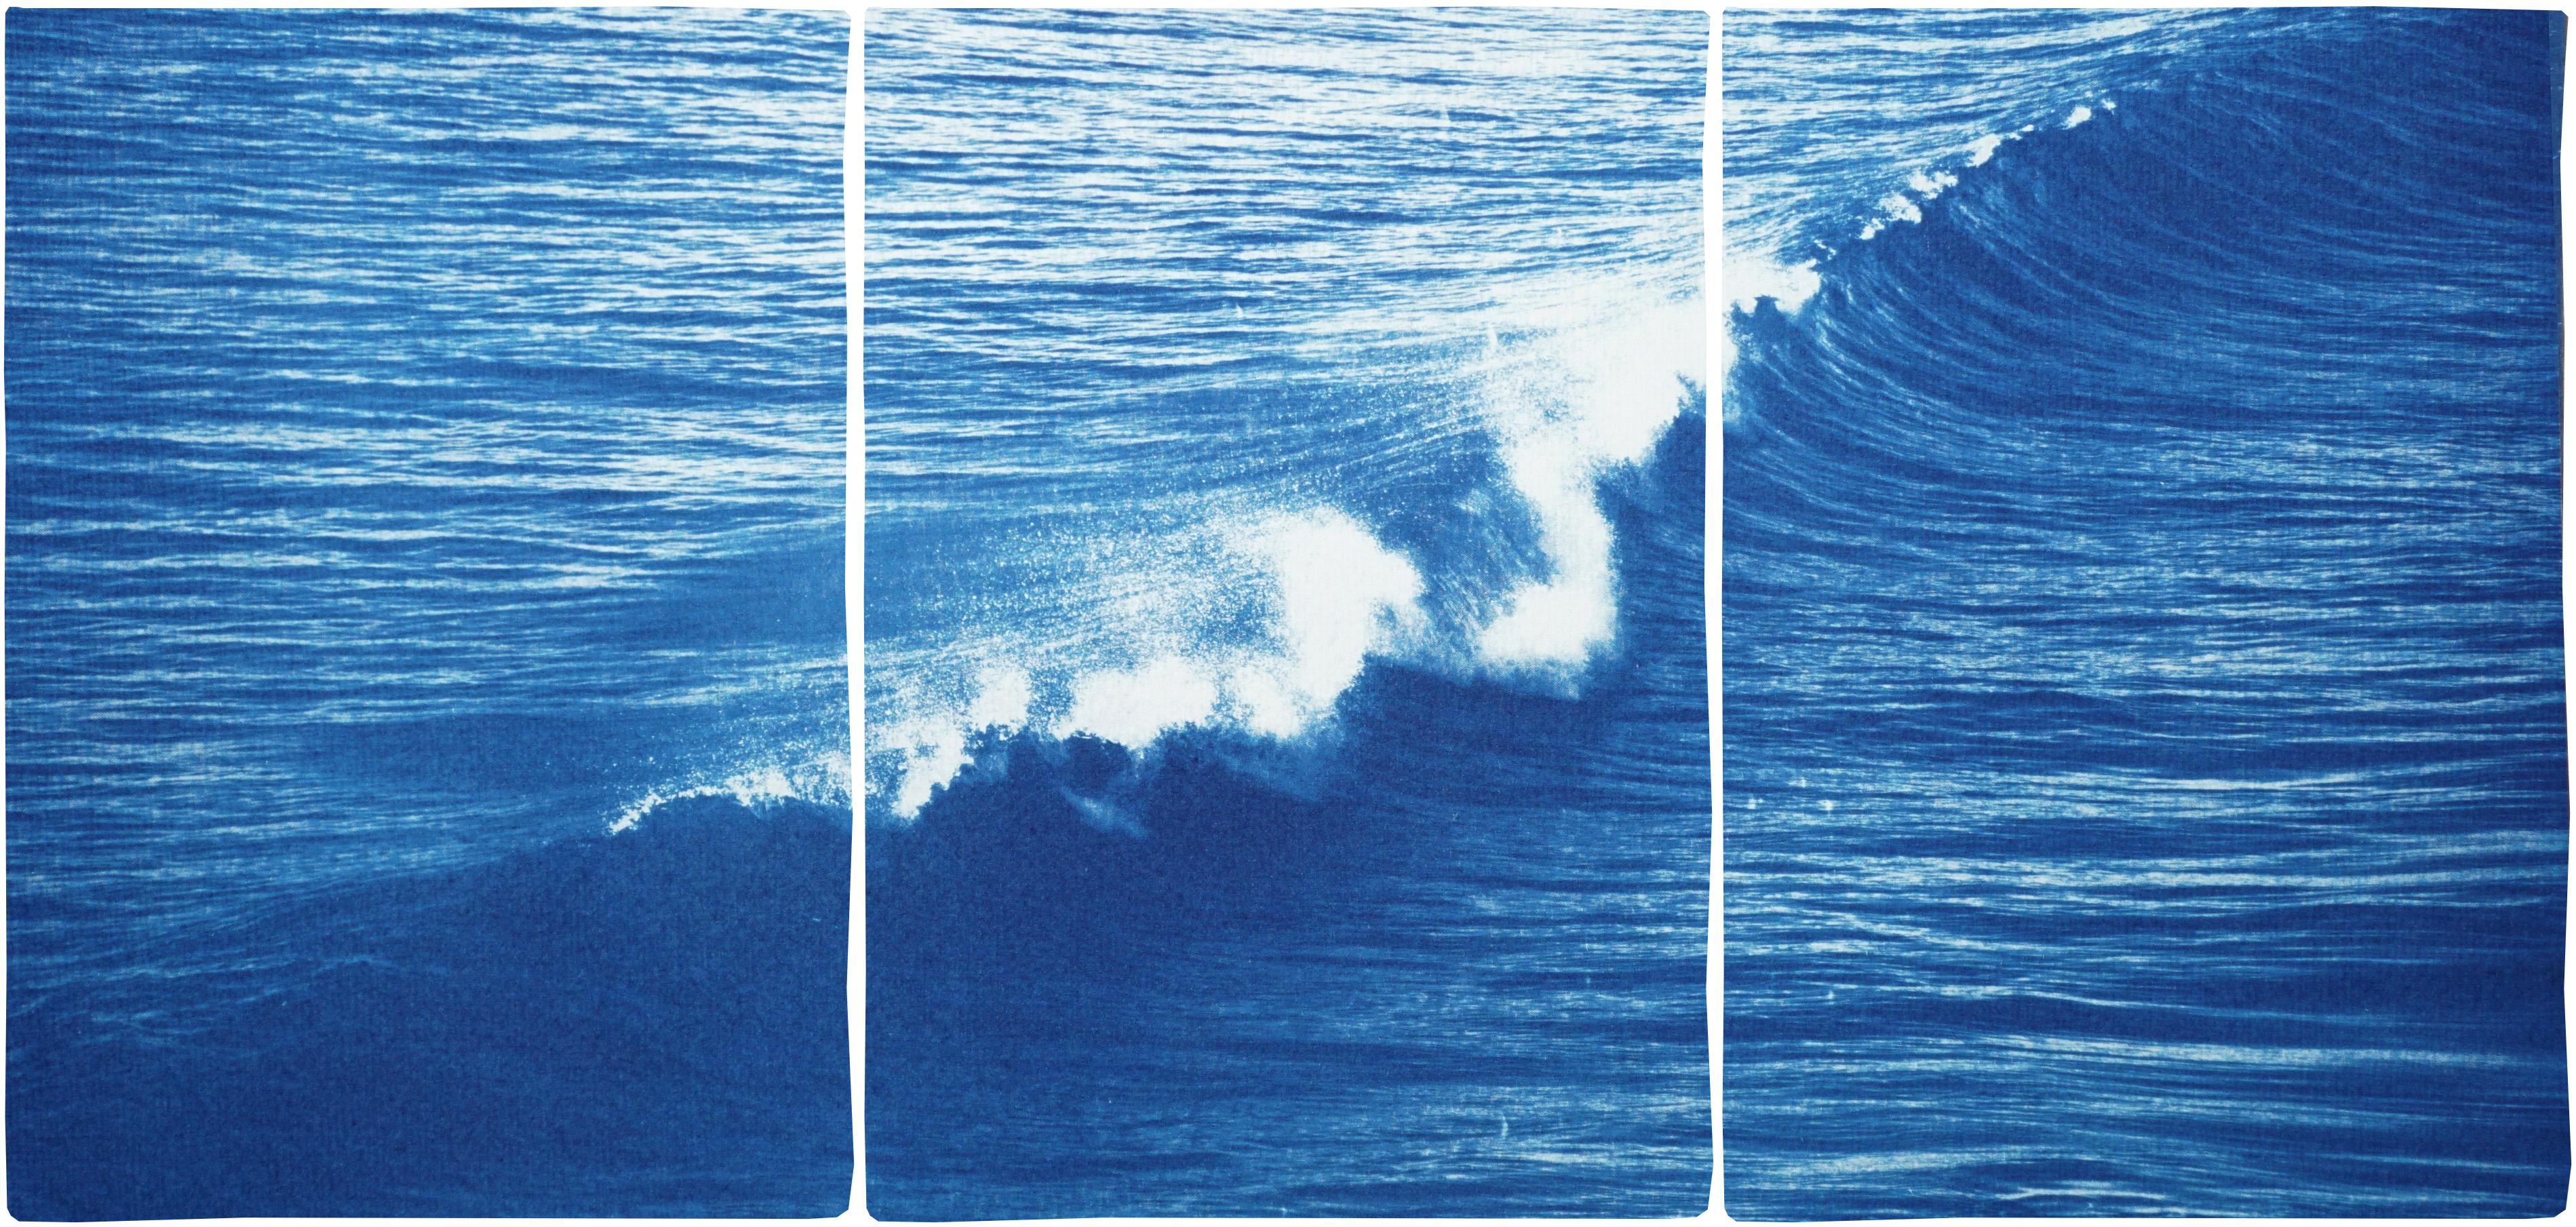 Kind of Cyan Landscape Painting - Colossal Seascape Triptych of Crashing Wave in Los Angeles, Exclusive Cyanotype